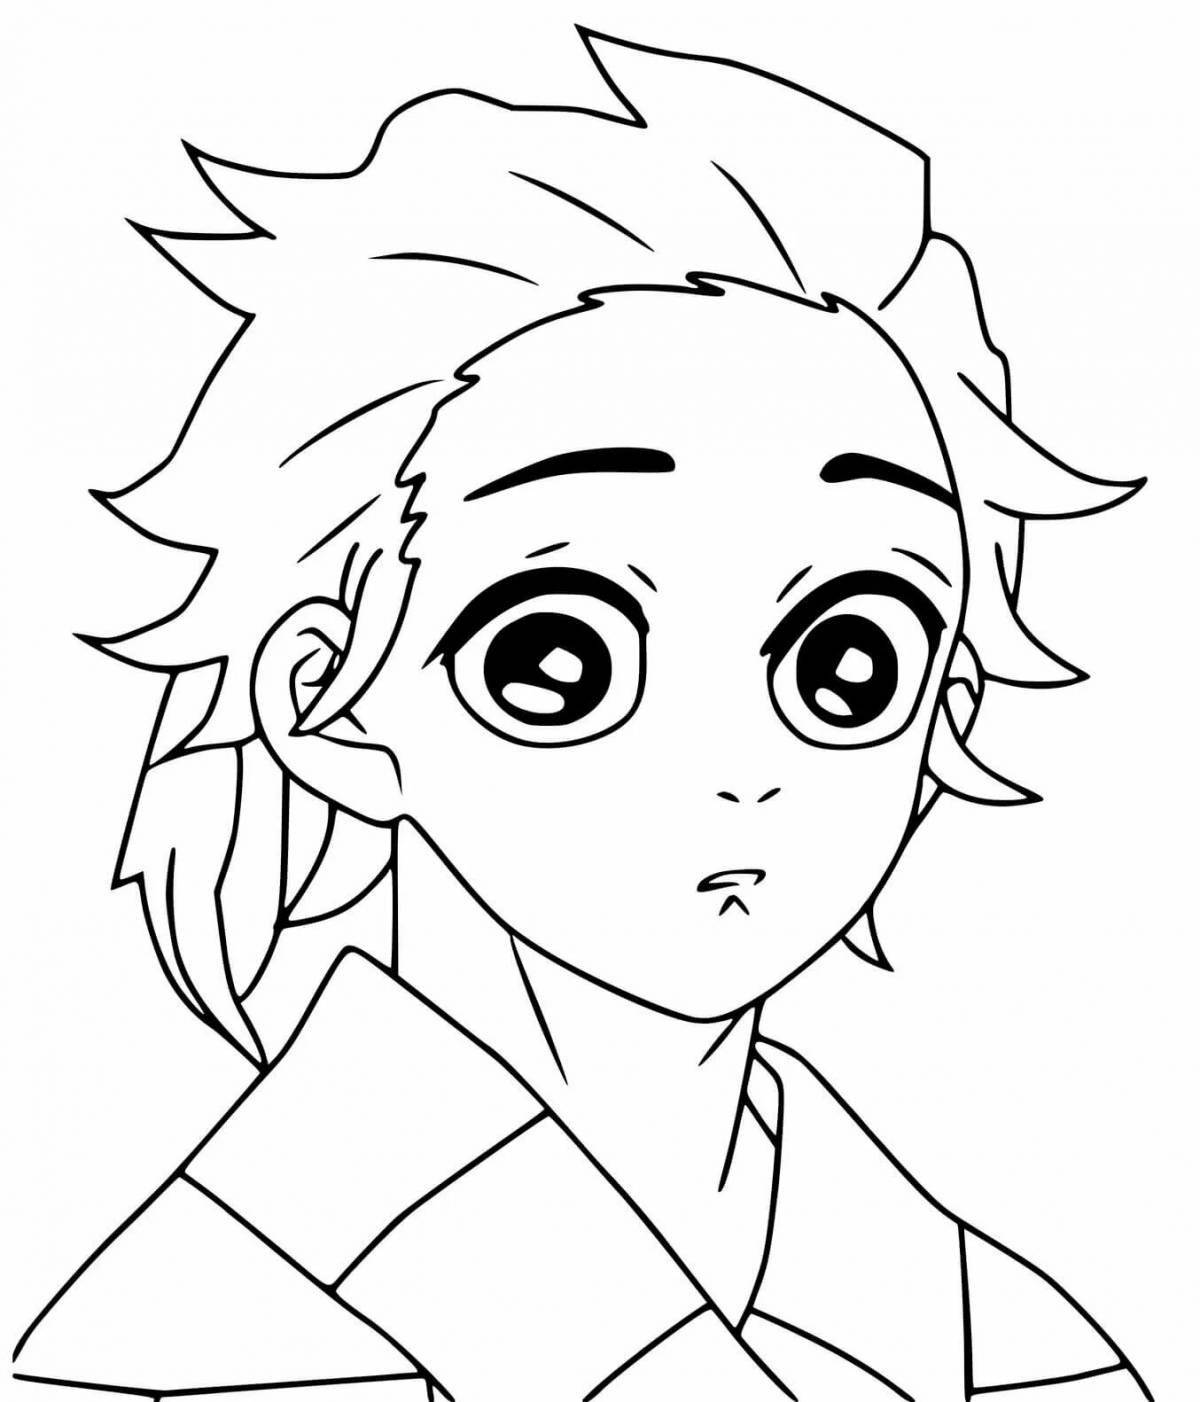 Tanjiro fairytale demon cleaver coloring page